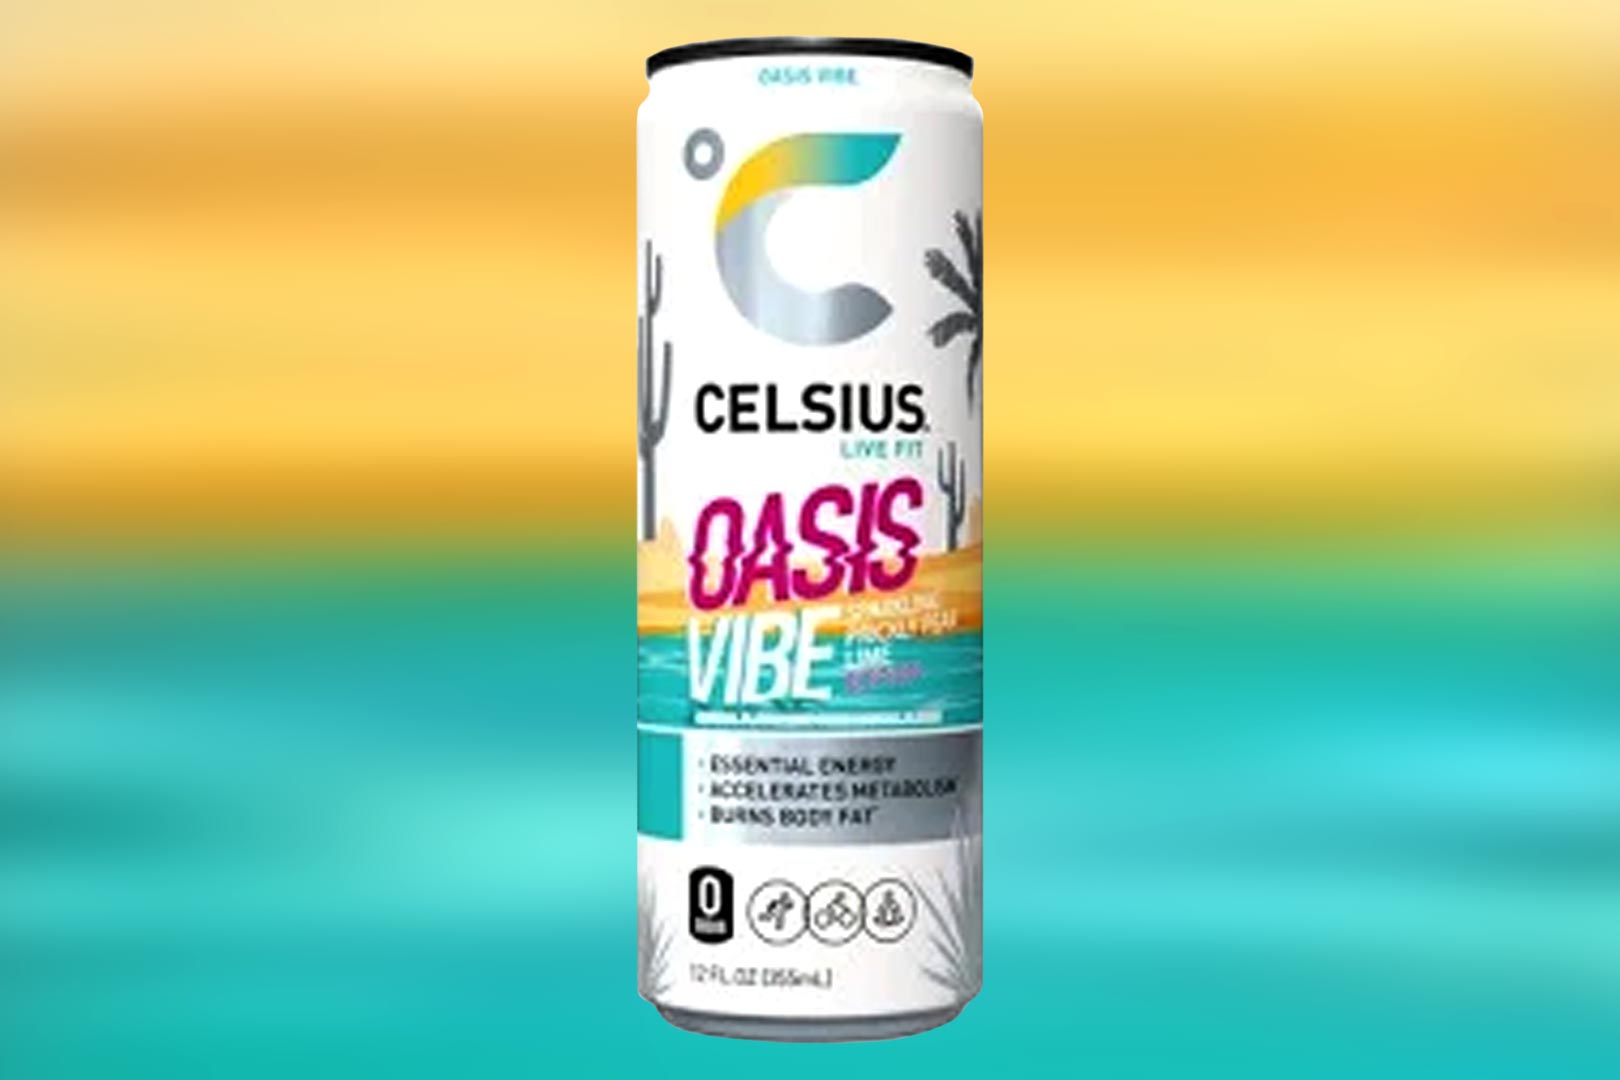 Oasis Vibe Celsius Energy Drink